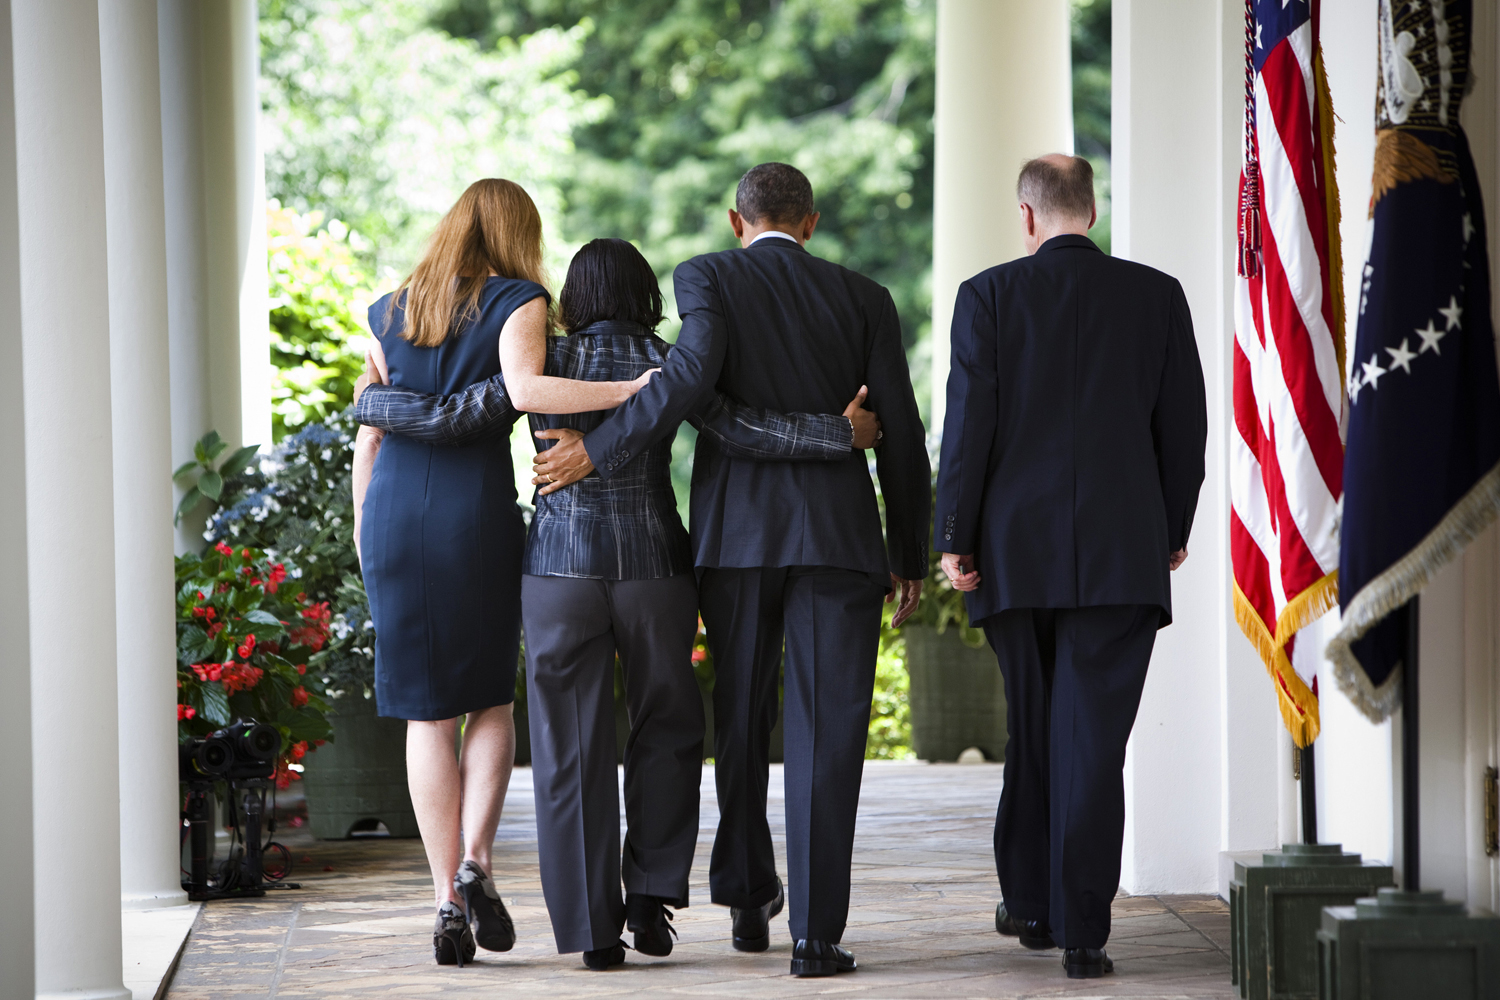 President Barack Obama with officials after an announcement in the Rose Garden of the White House.